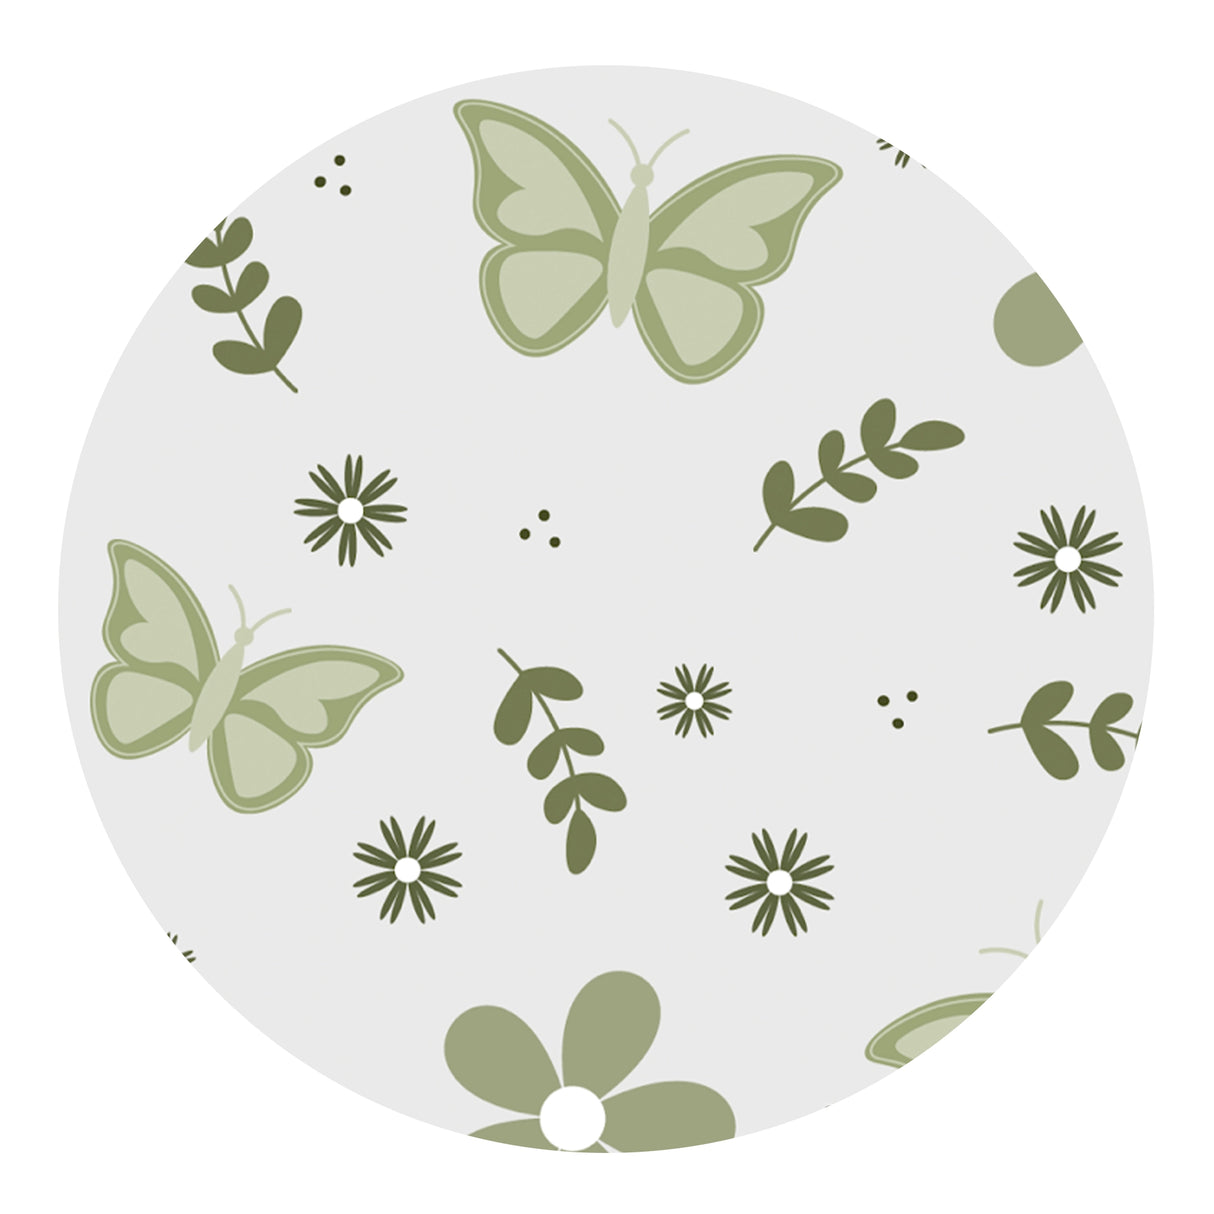 Butterflies and Flowers Sublimation Paper Print